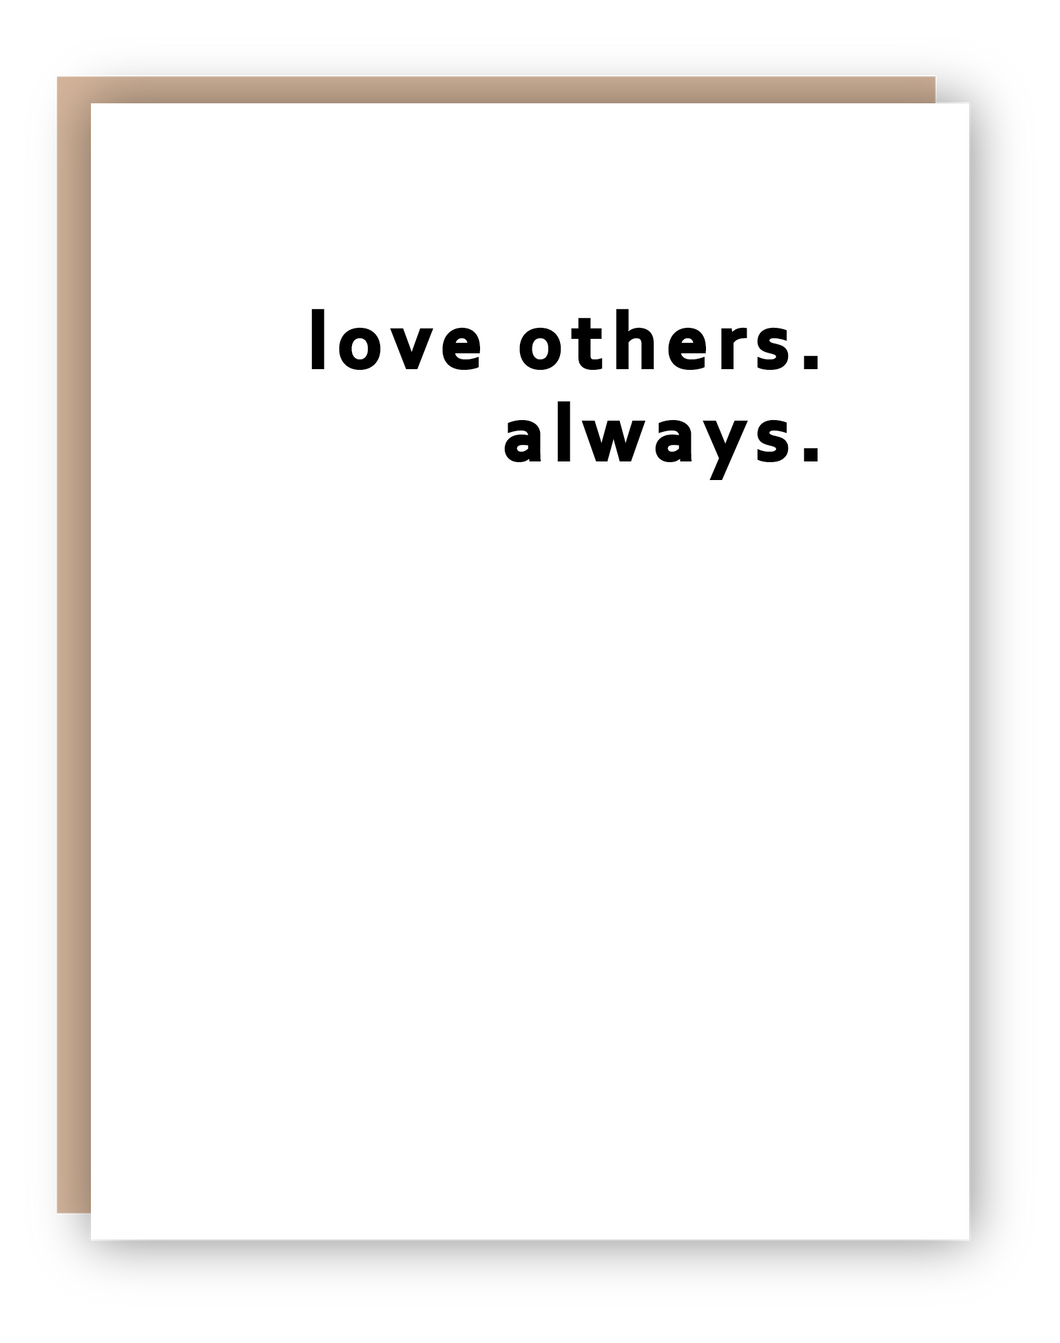 LOVE OTHERS ALWAYS